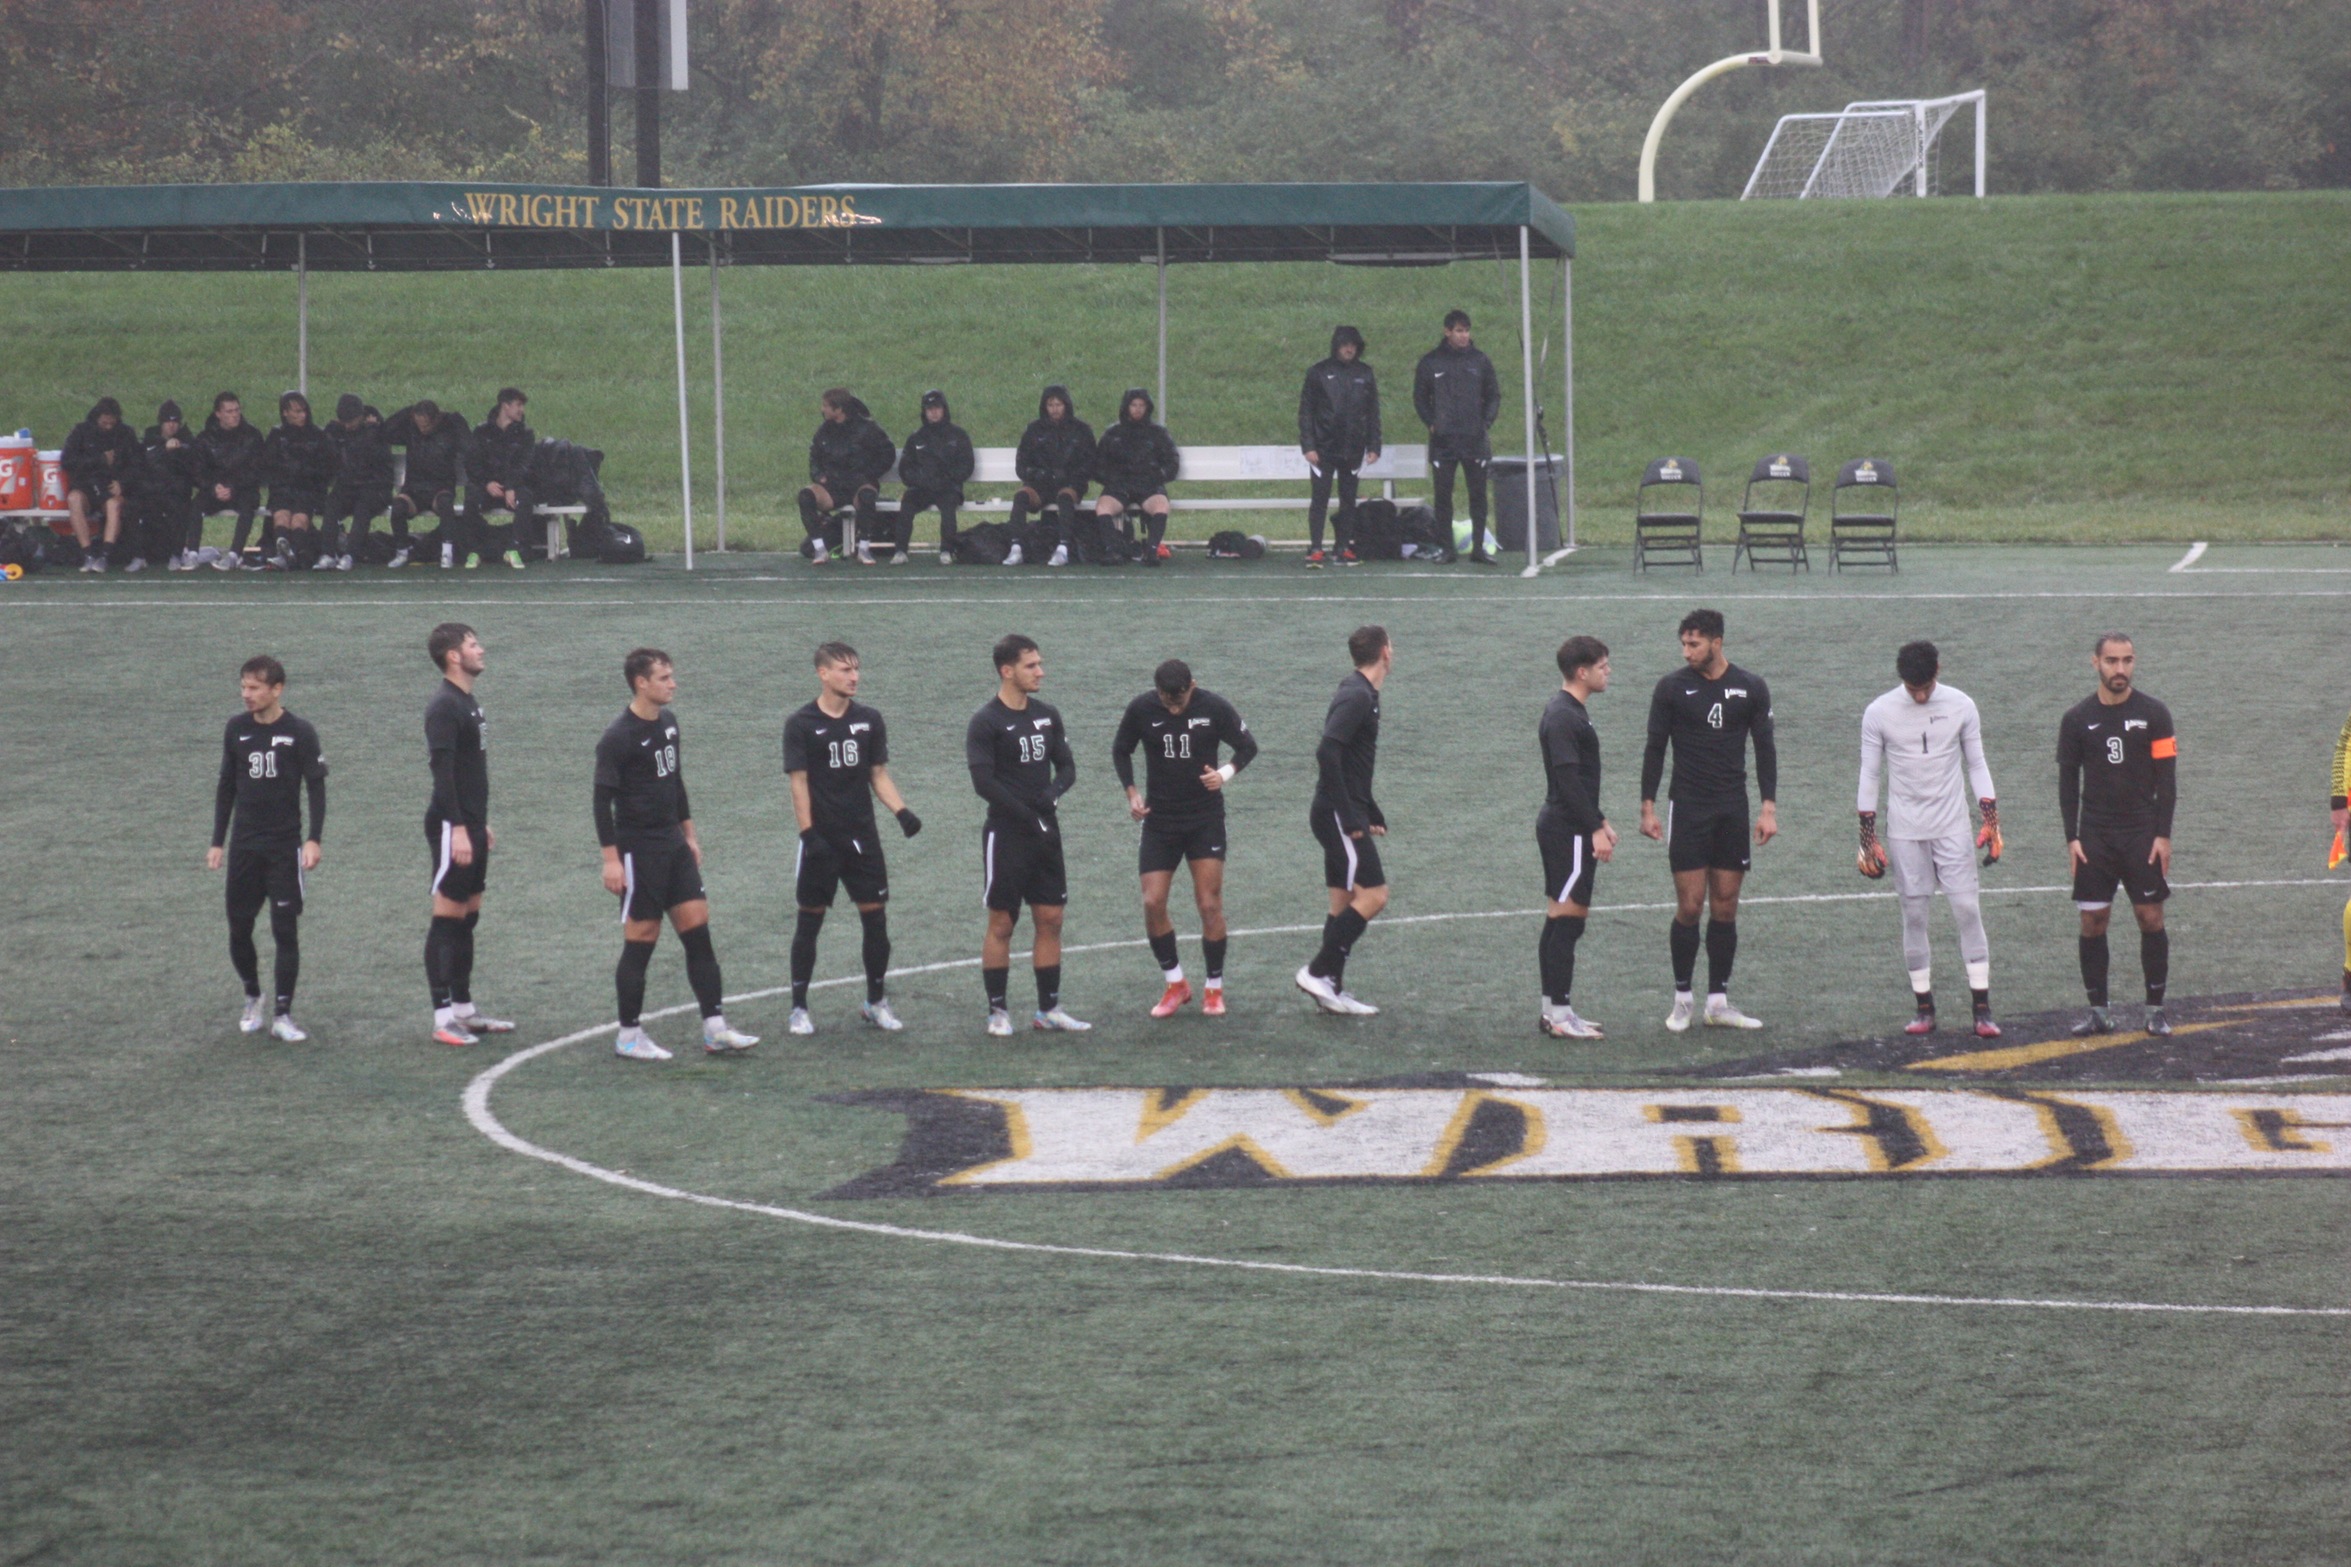 Cleveland State Men's Soccer Earns No. 2 Seed, Receives a Bye Into Tournament Semifinals